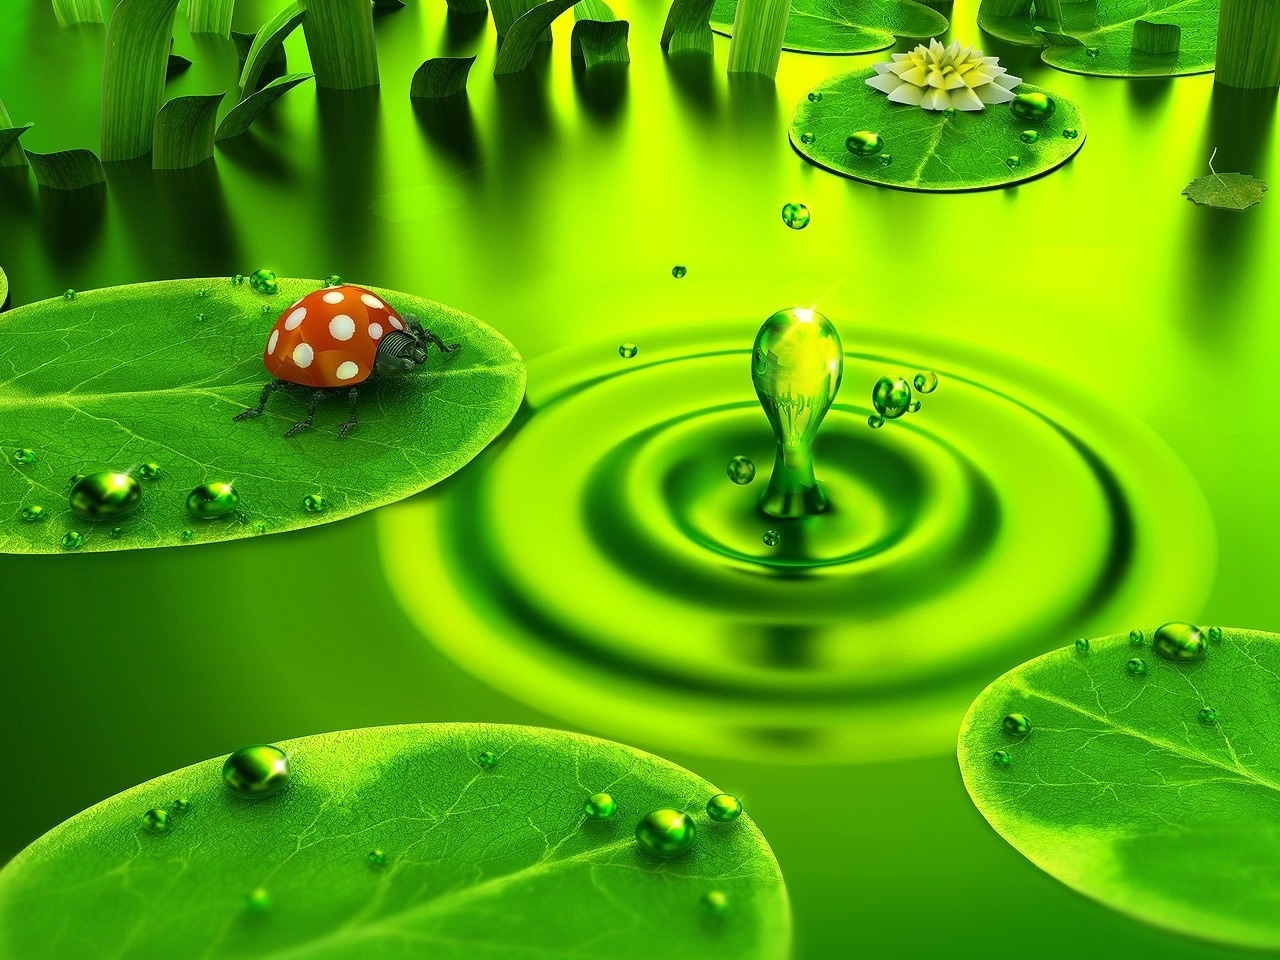 Phone Background Full HD green, ladybugs, pictures